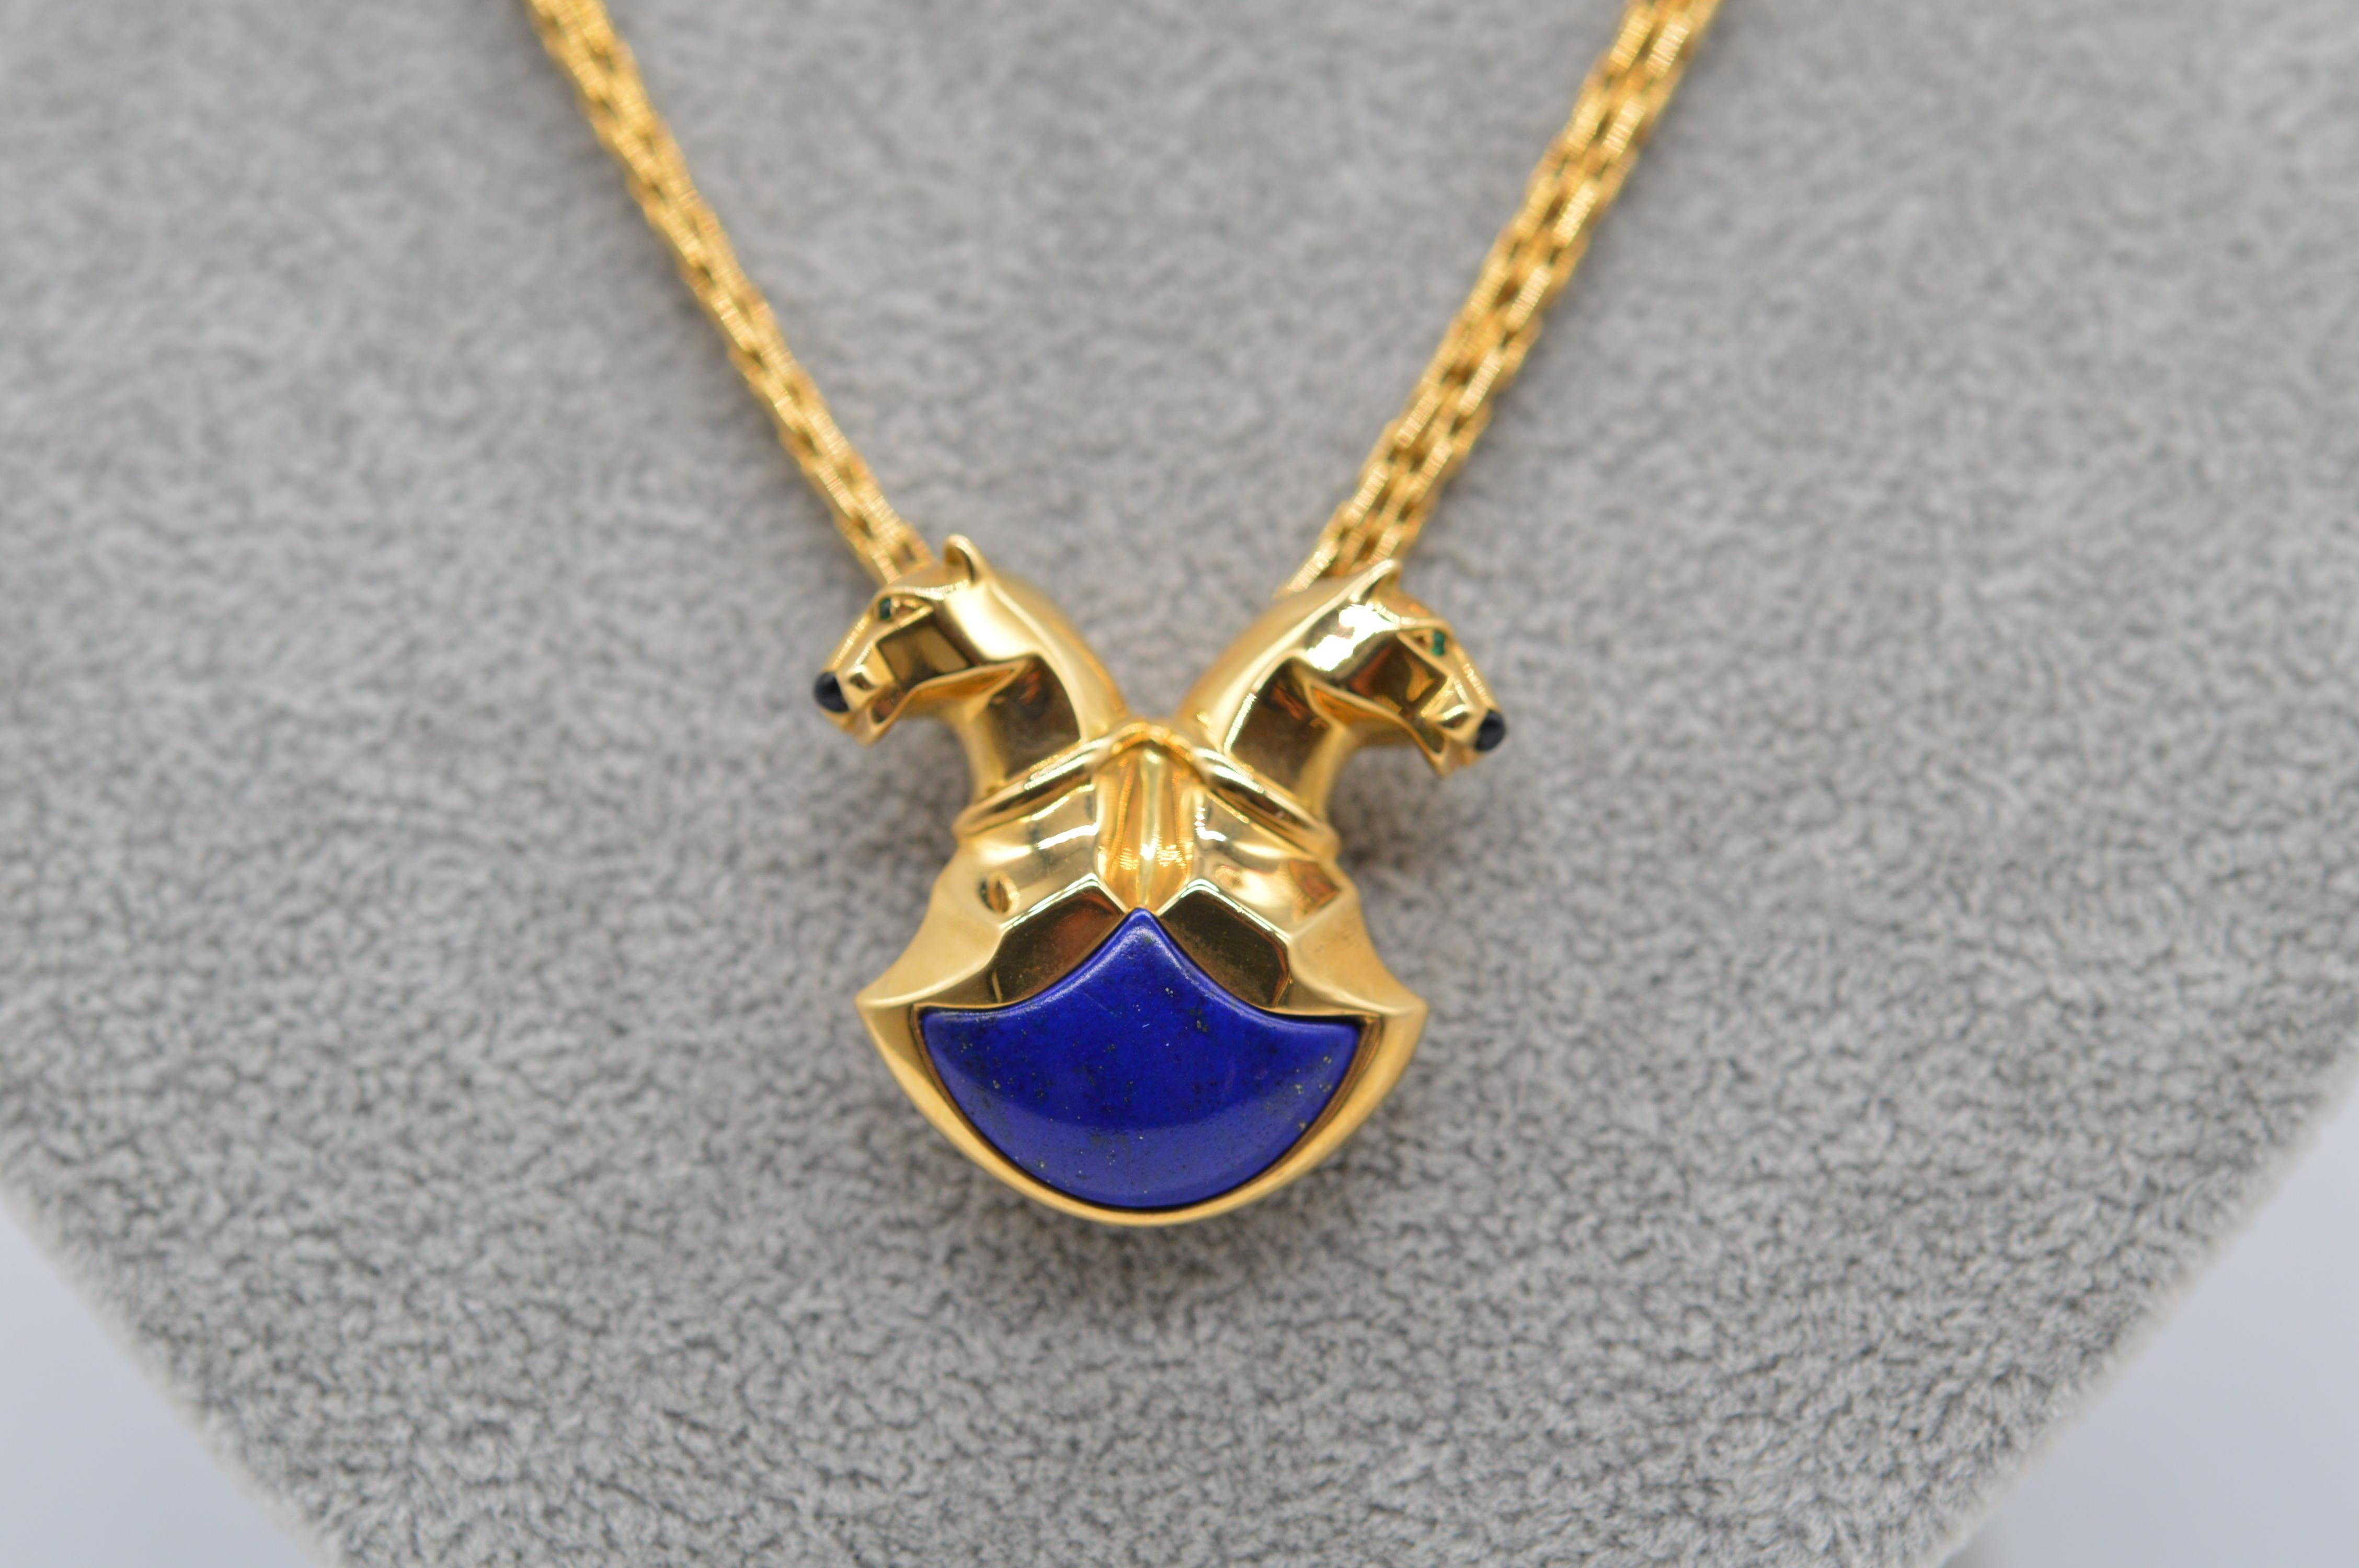 Cartier Panthère Lapis Lazuli Necklace & Brooch
18K Yellow Gold
Weight 46.5 grams
Emerald Eye & Onyx Nose
Vintage unworn condition
From 1995

